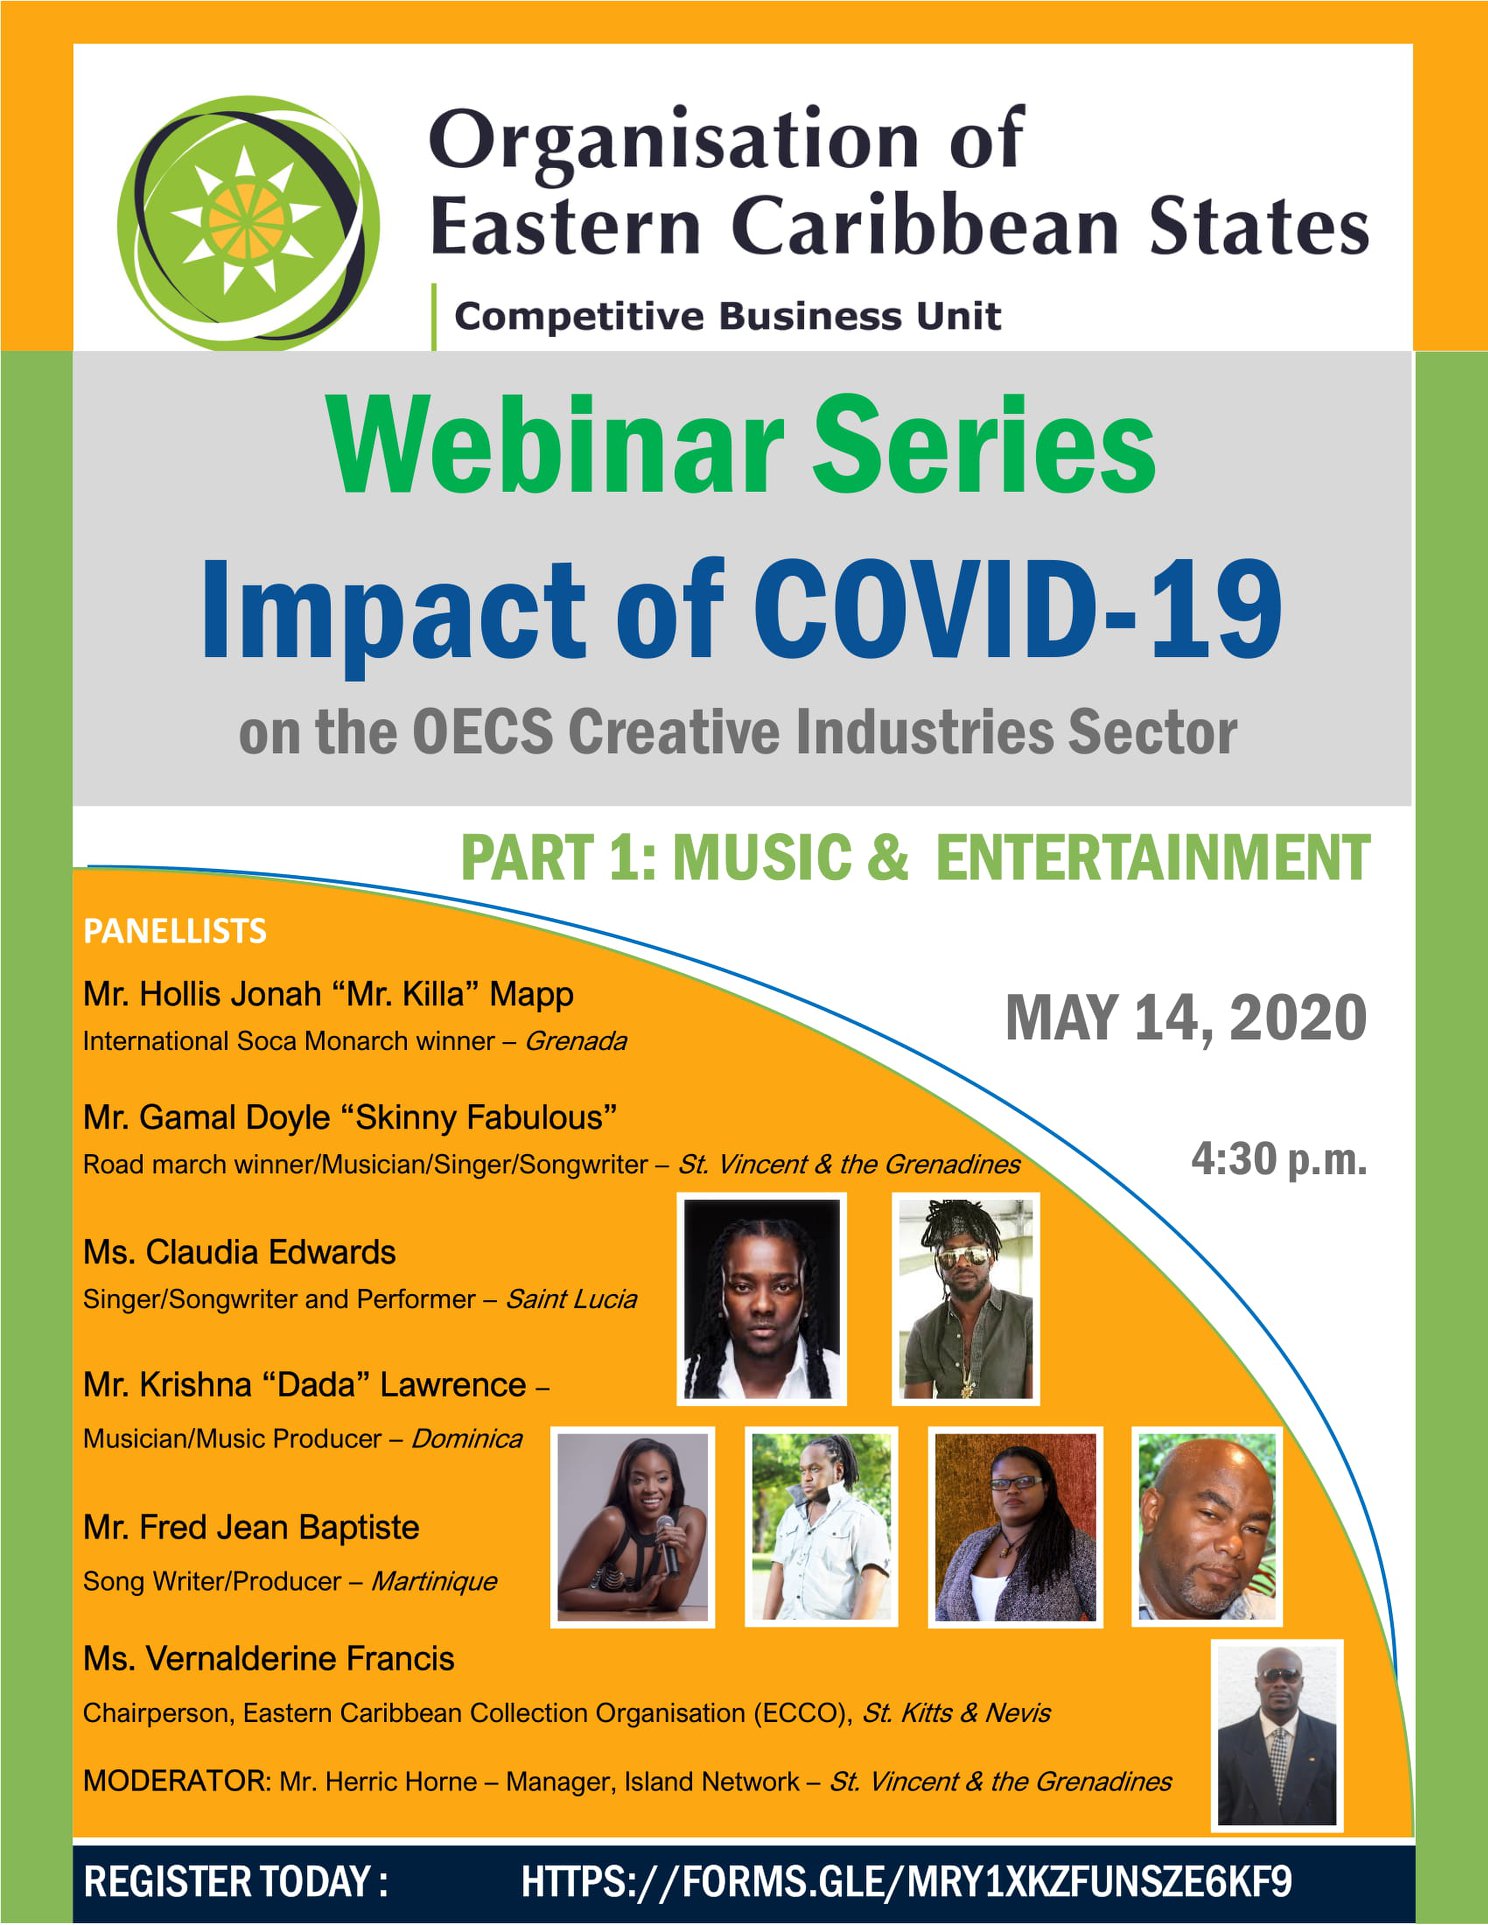 OECS Competitive Business Unit Launches Timely Webinar Series to Assist Creatives in the Region